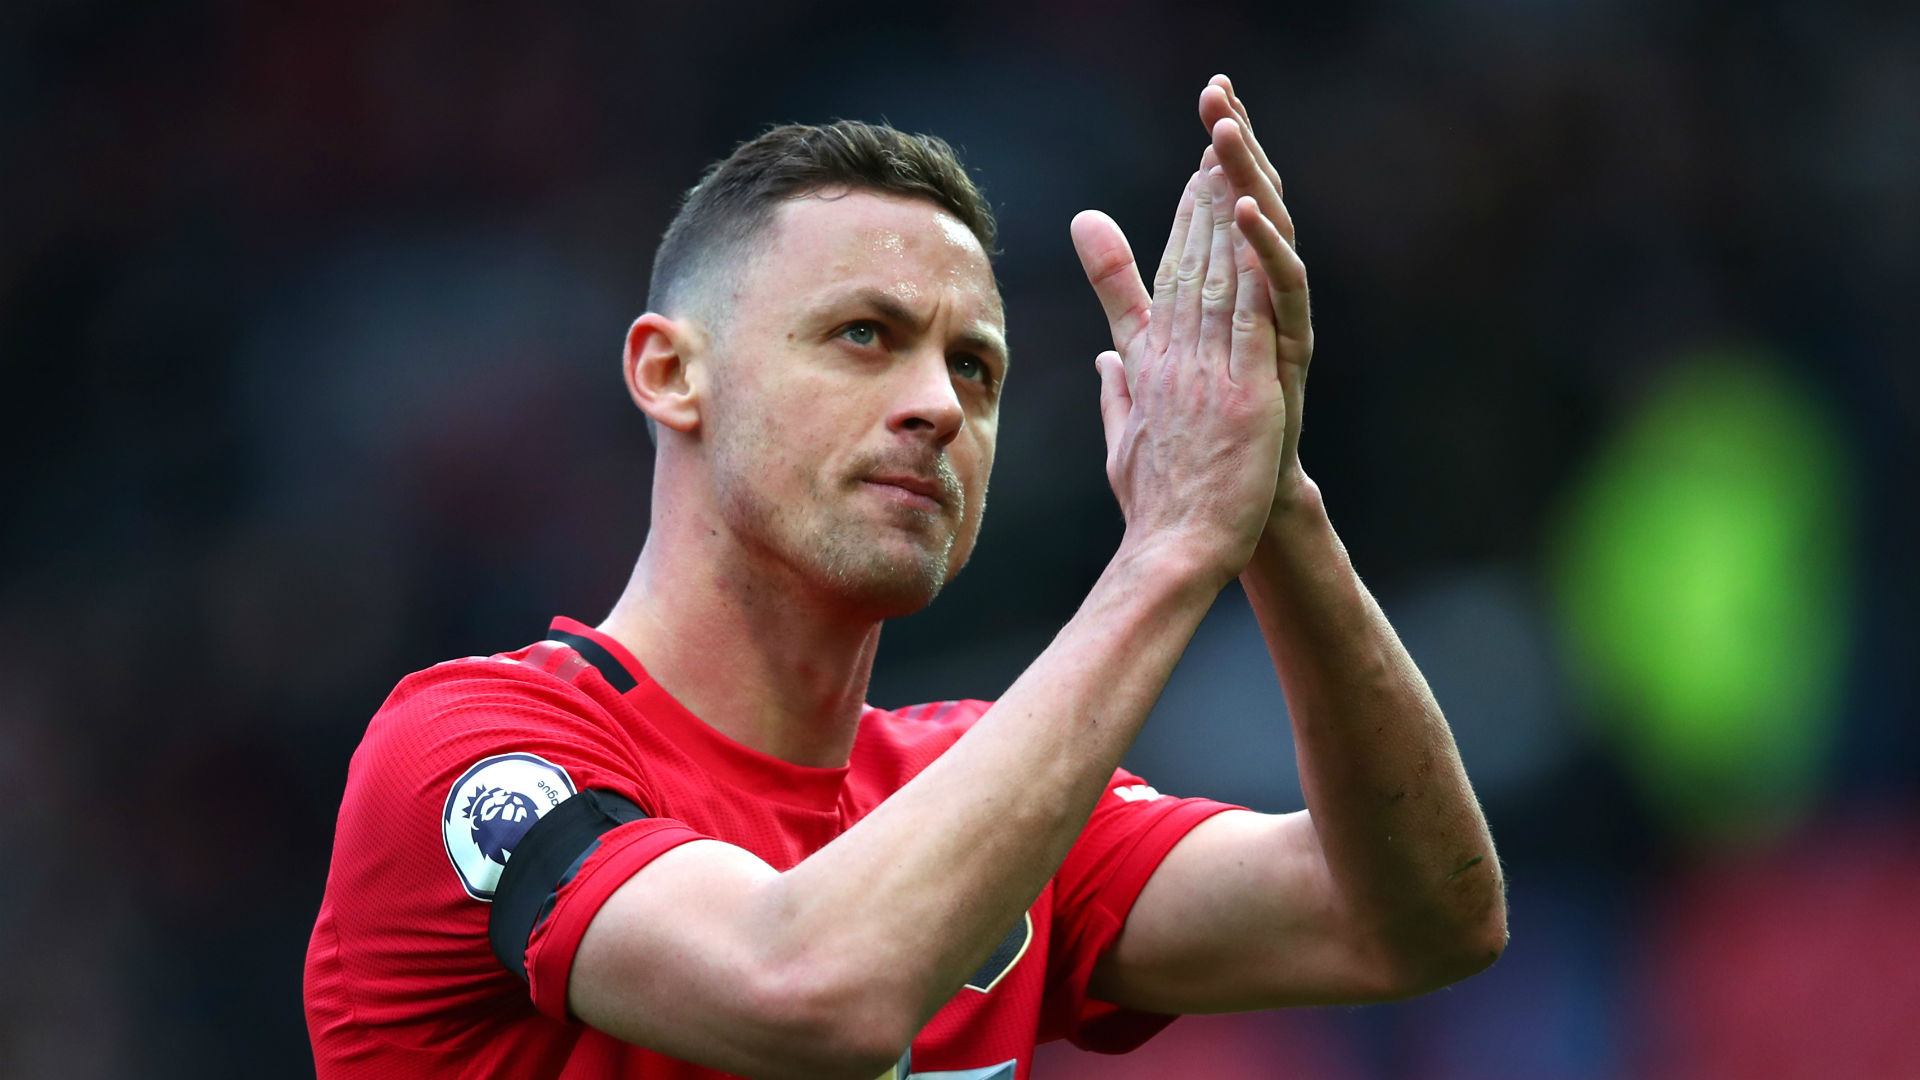 Matic playing his way towards another Man Utd contract if he wants one - Solskjaer